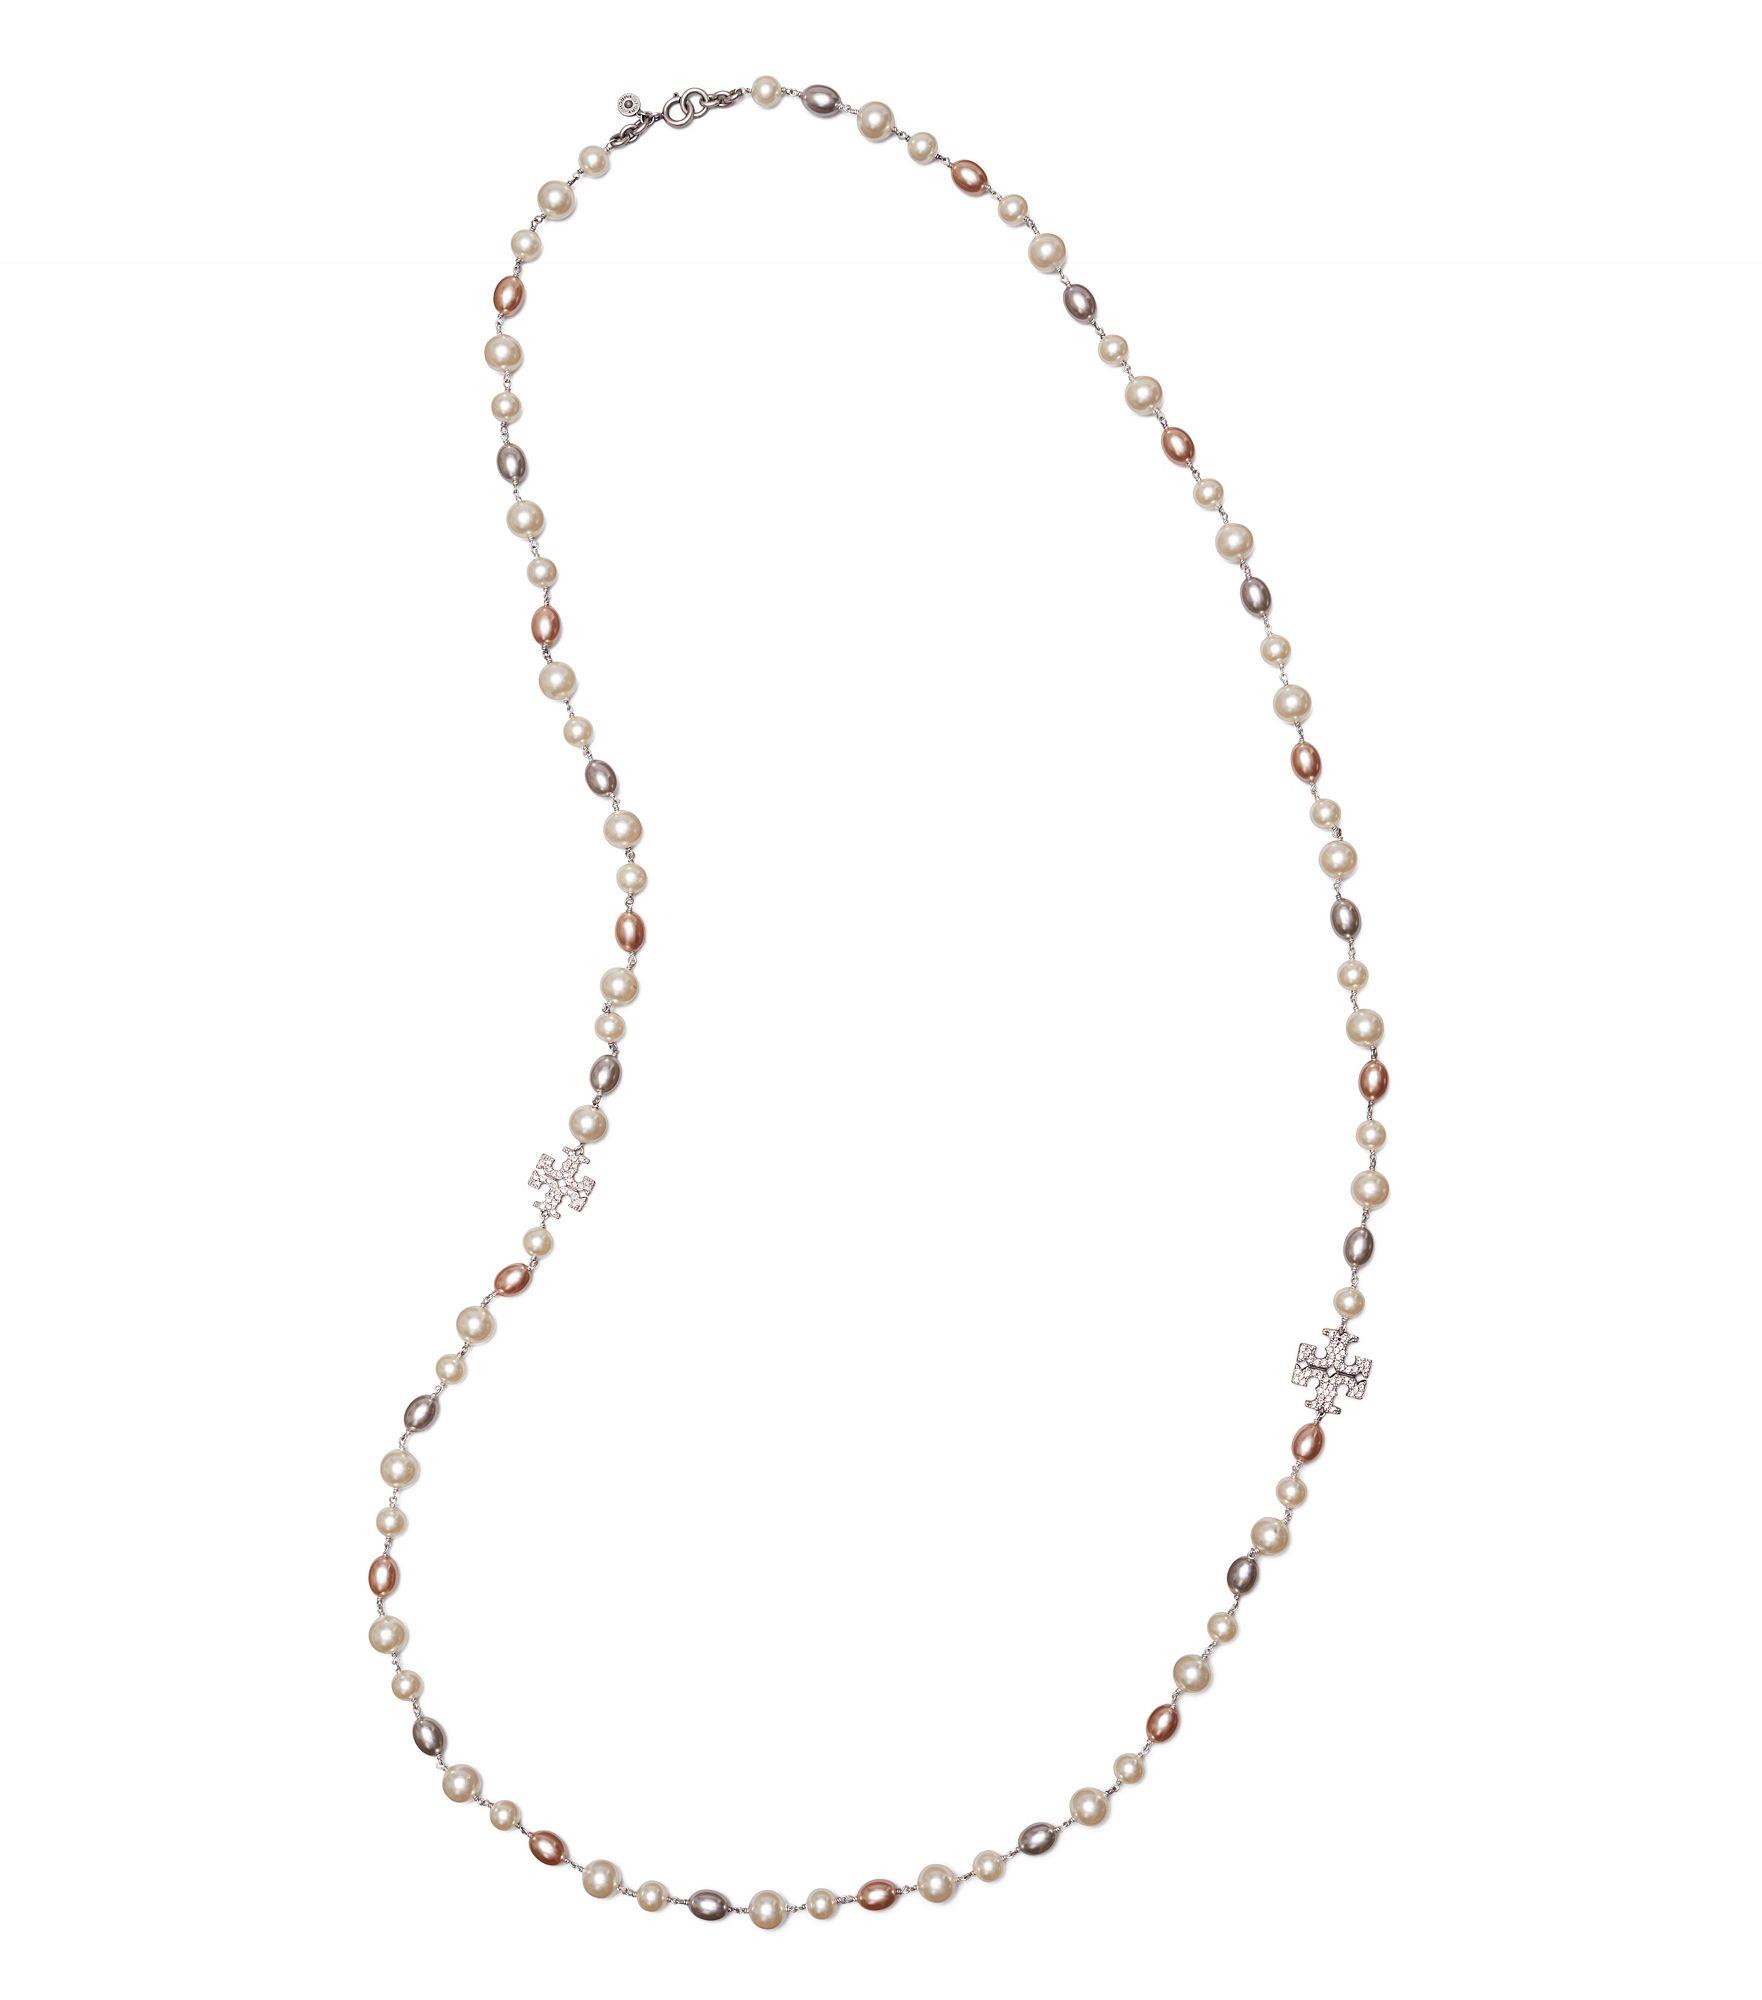 Tory Burch Kira Pave & Pearl Long Necklace in Metallic - Lyst